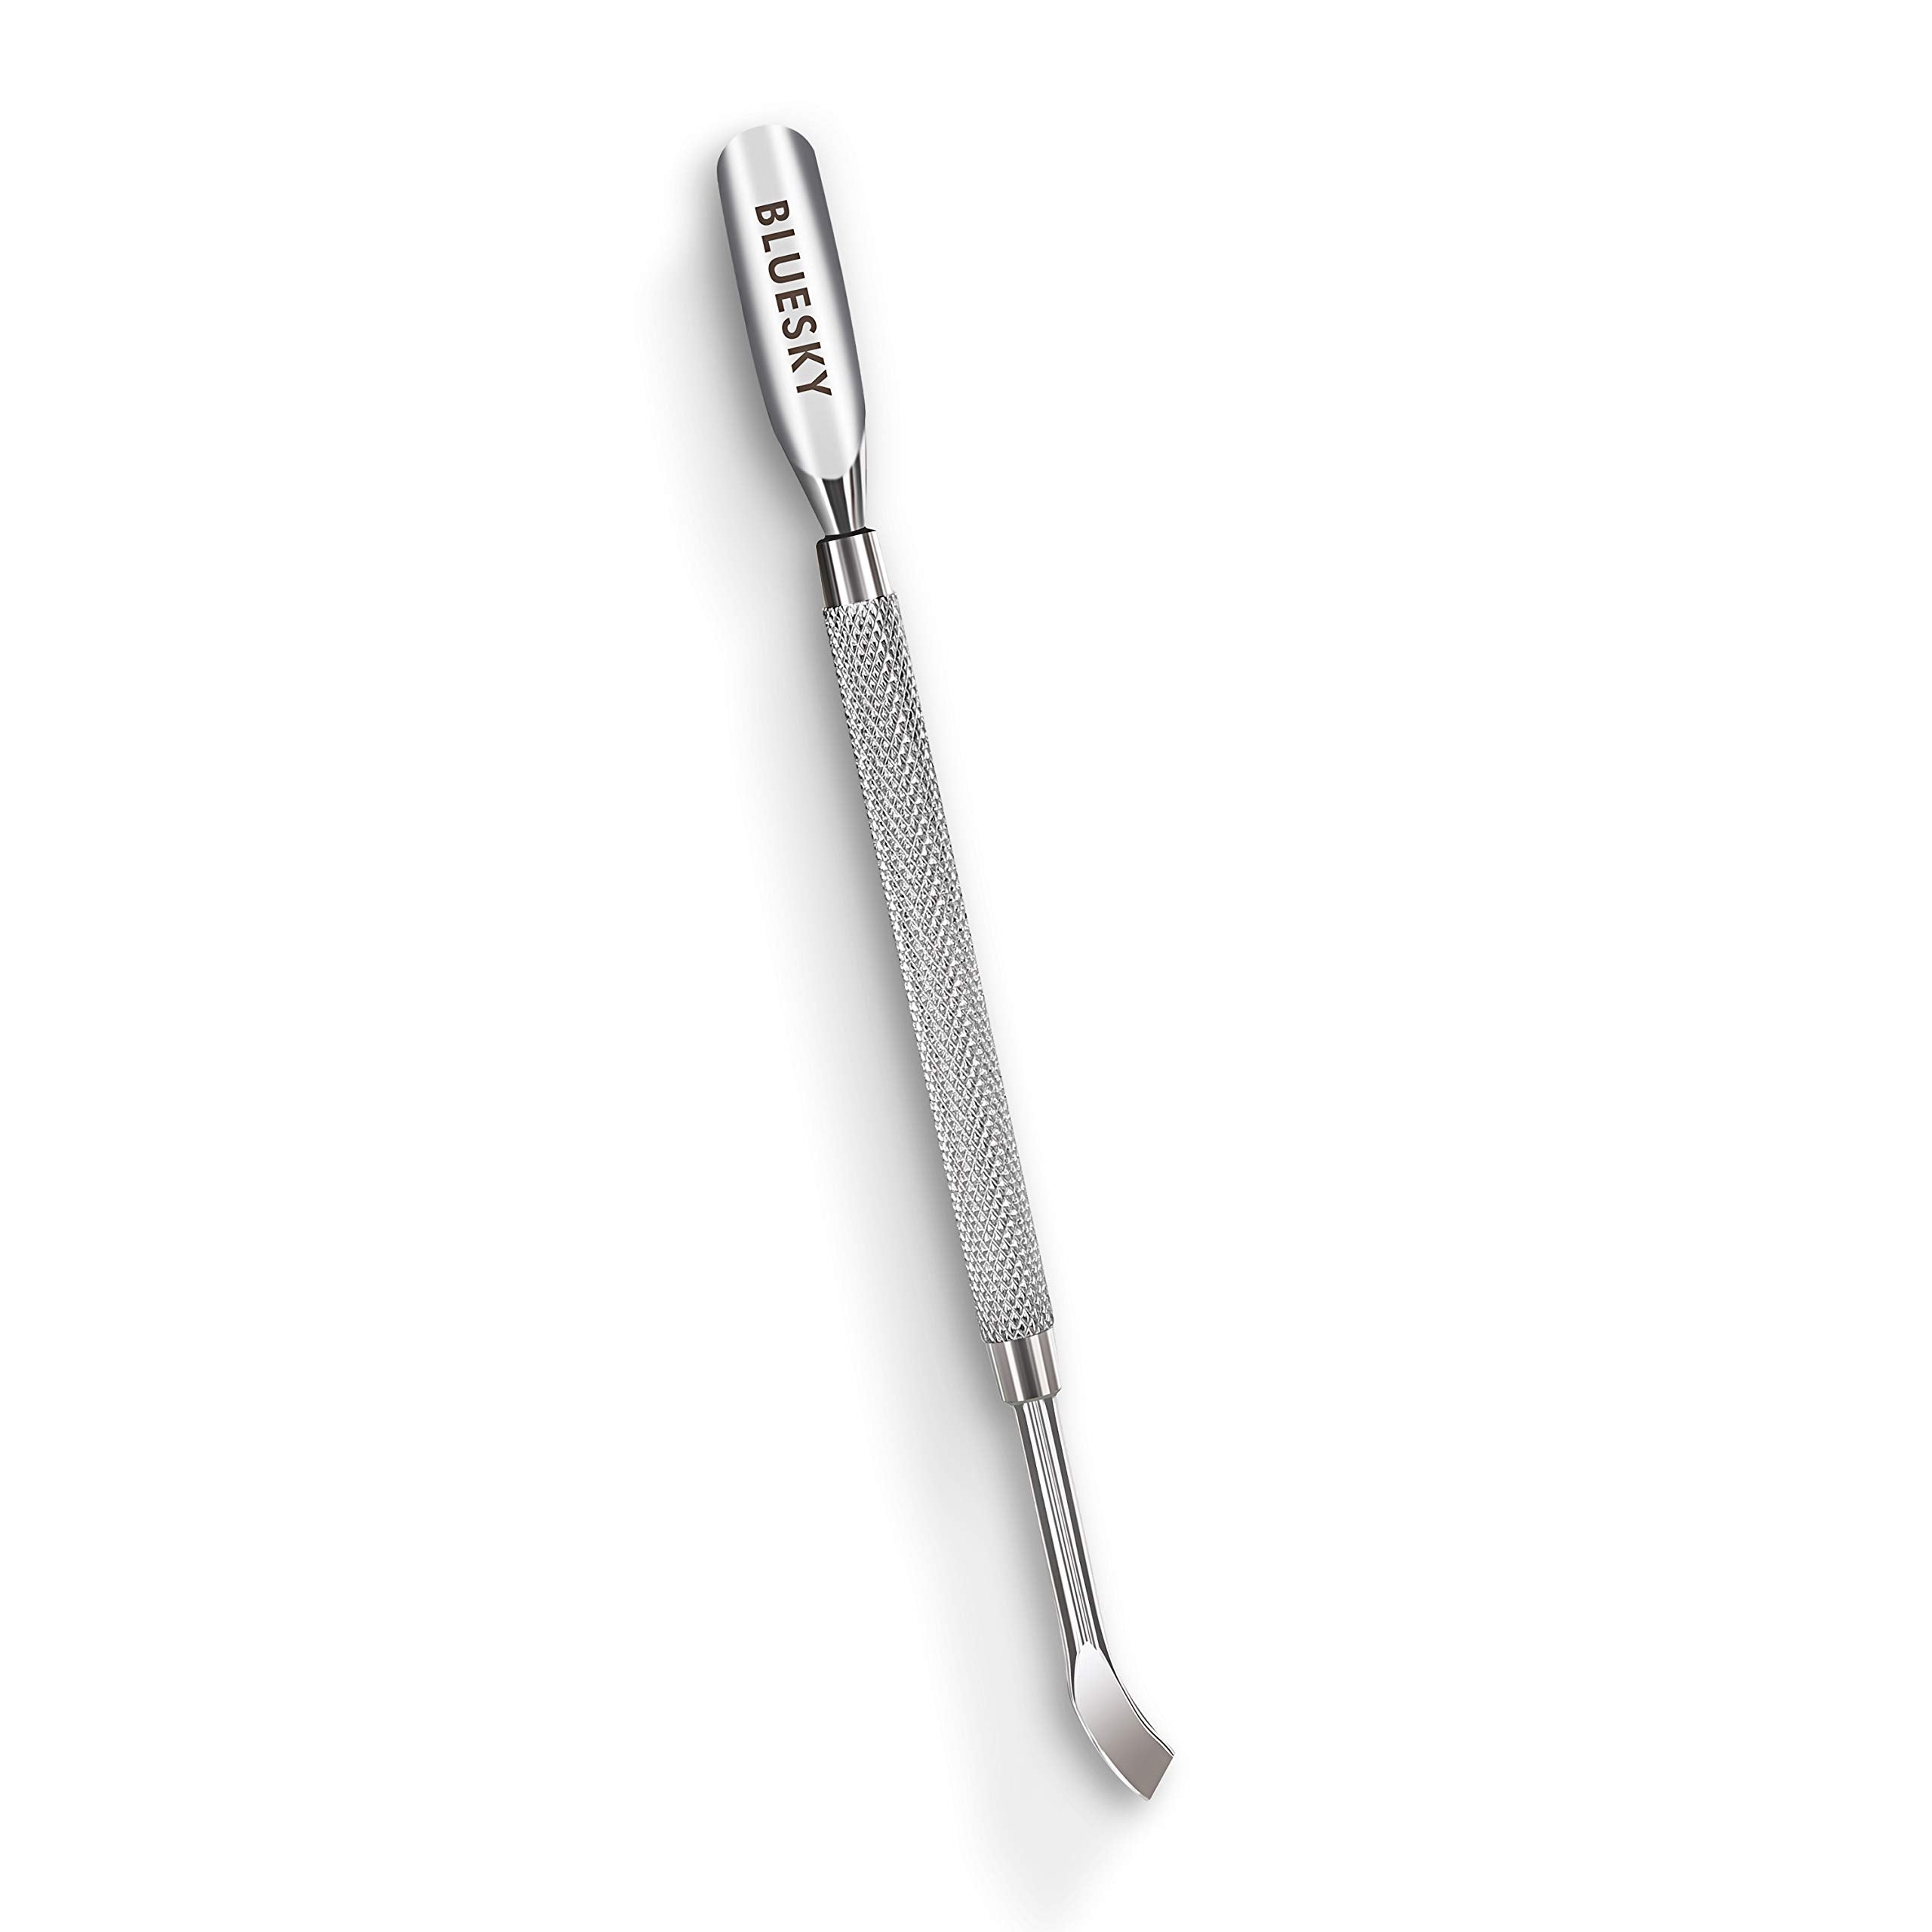 Bluesky Cuticle Pusher Tool and Nail Cleaner, Professional, Double Ended, Metal, Stainless Steel, Gel Nail Polish Remover, Scraper